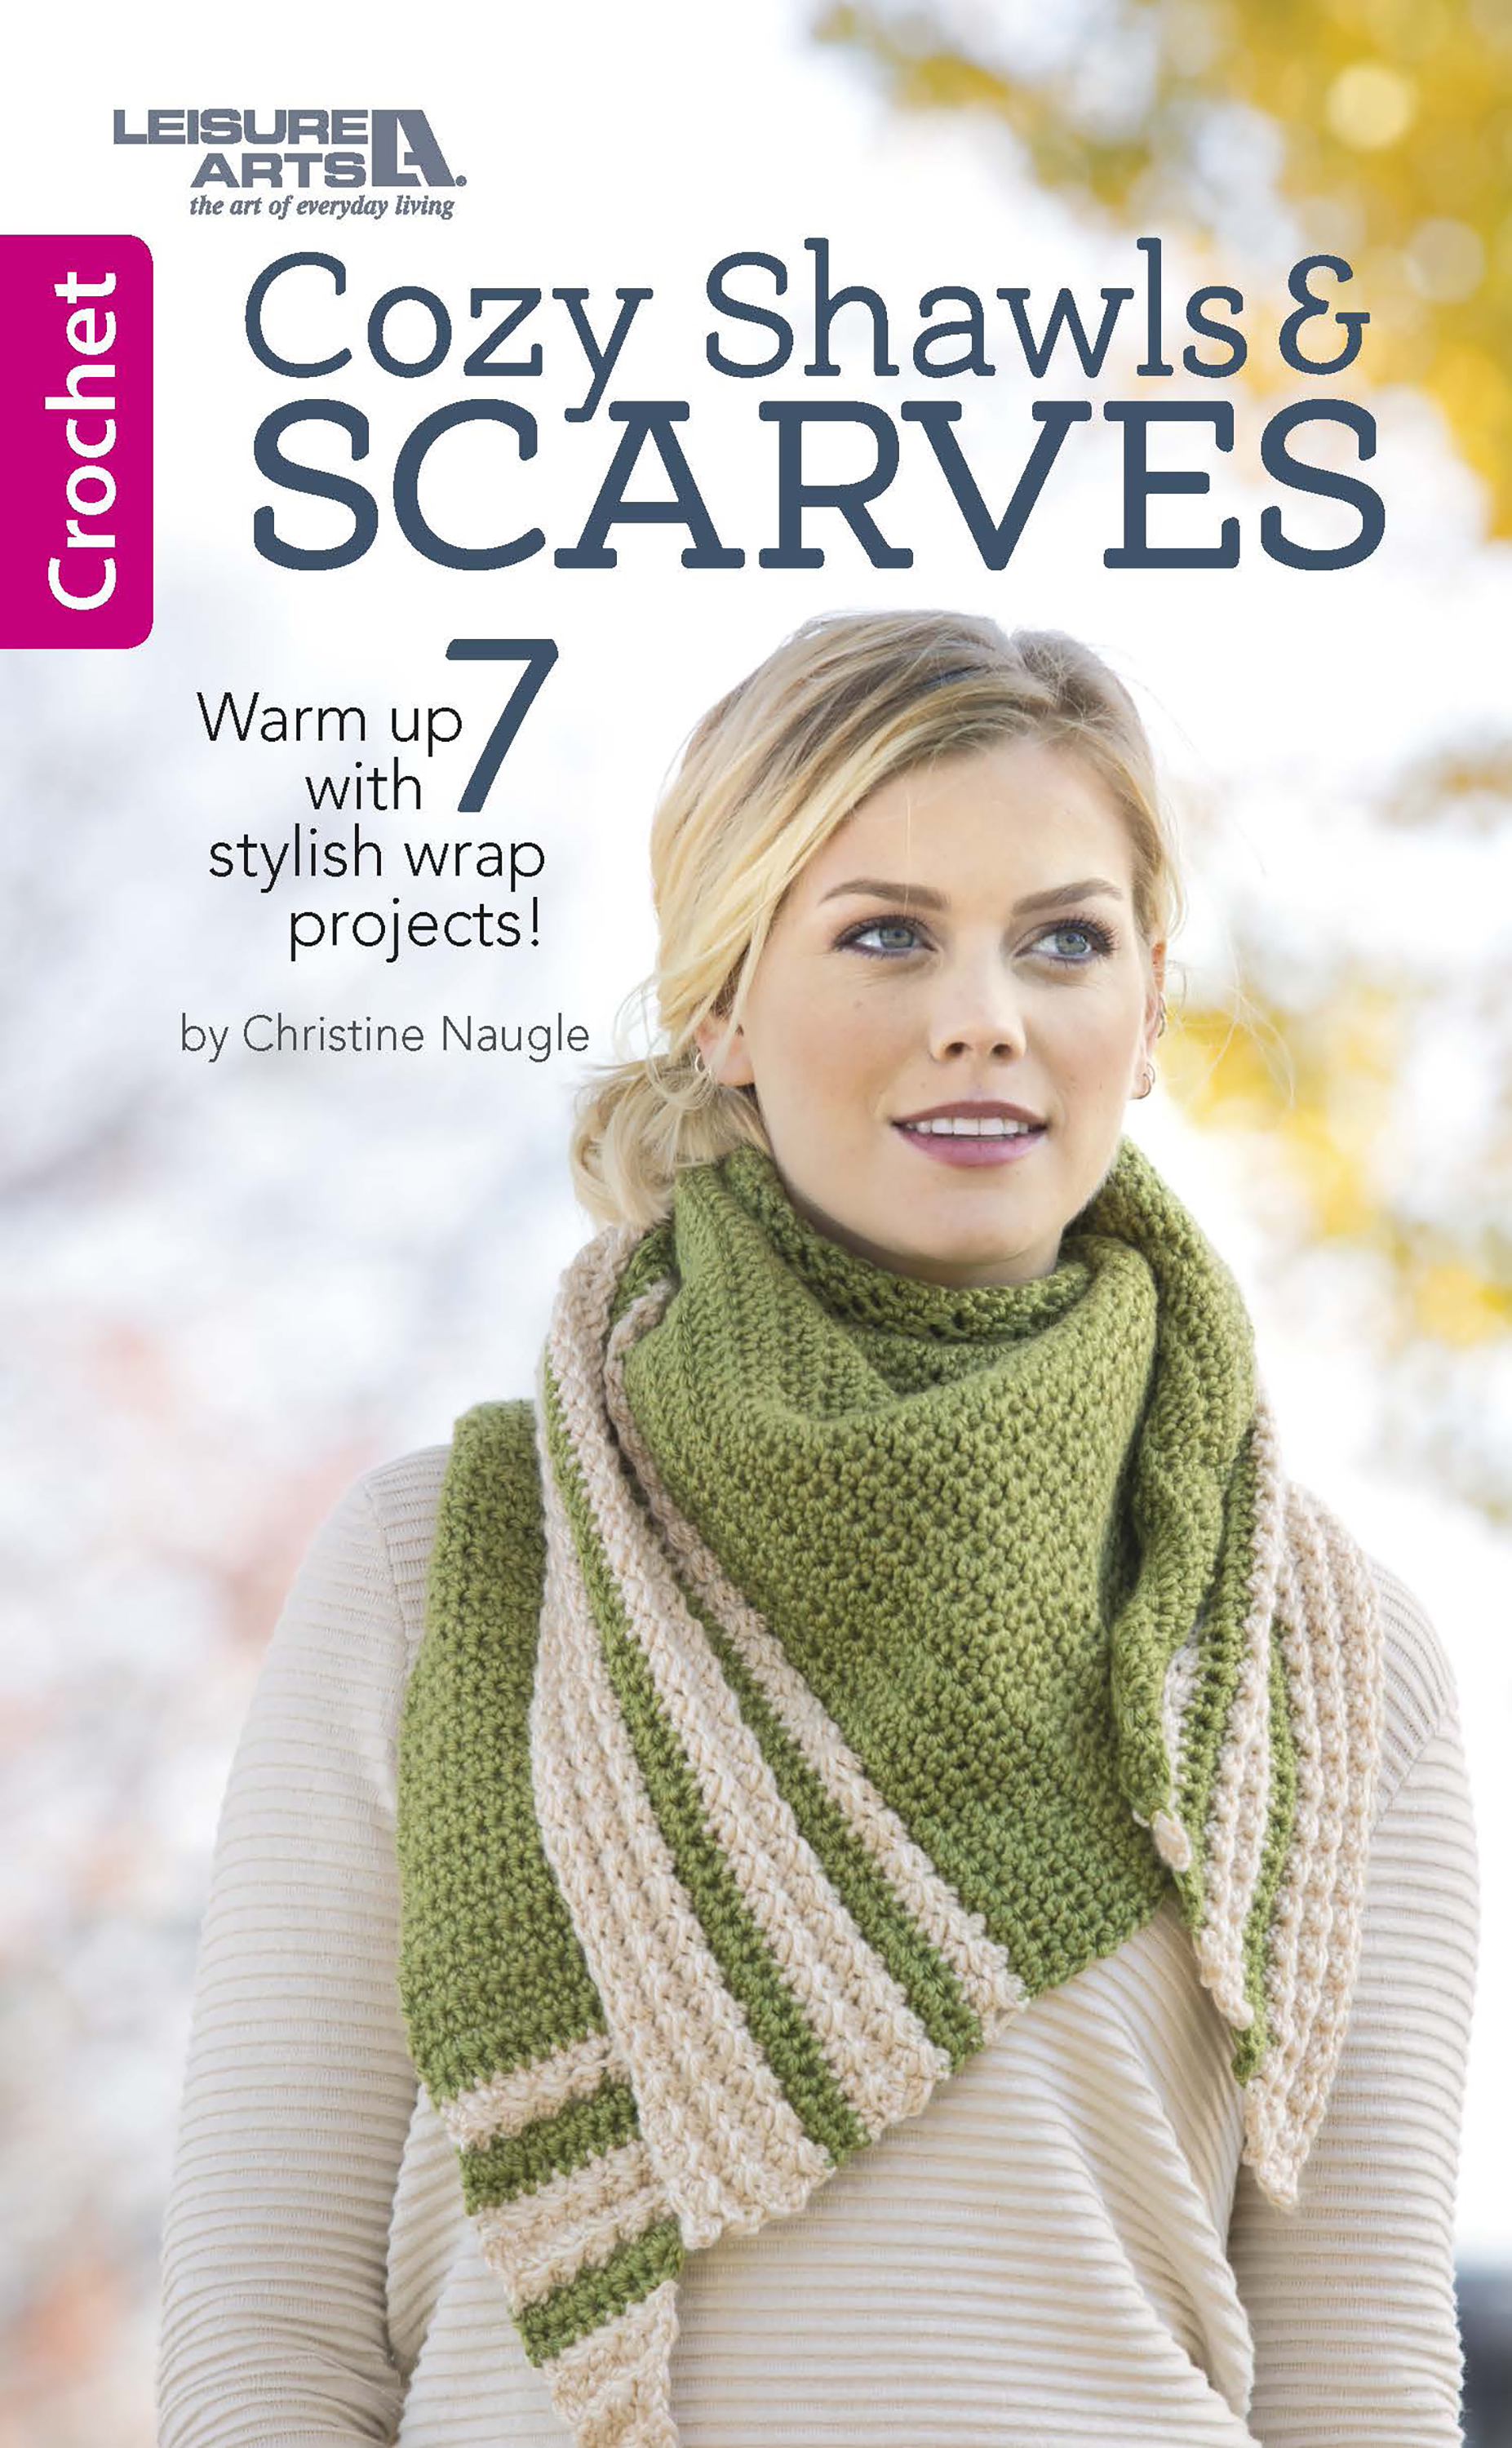 You are currently viewing Cozy Shawls & Scarves – Crochet Patterns